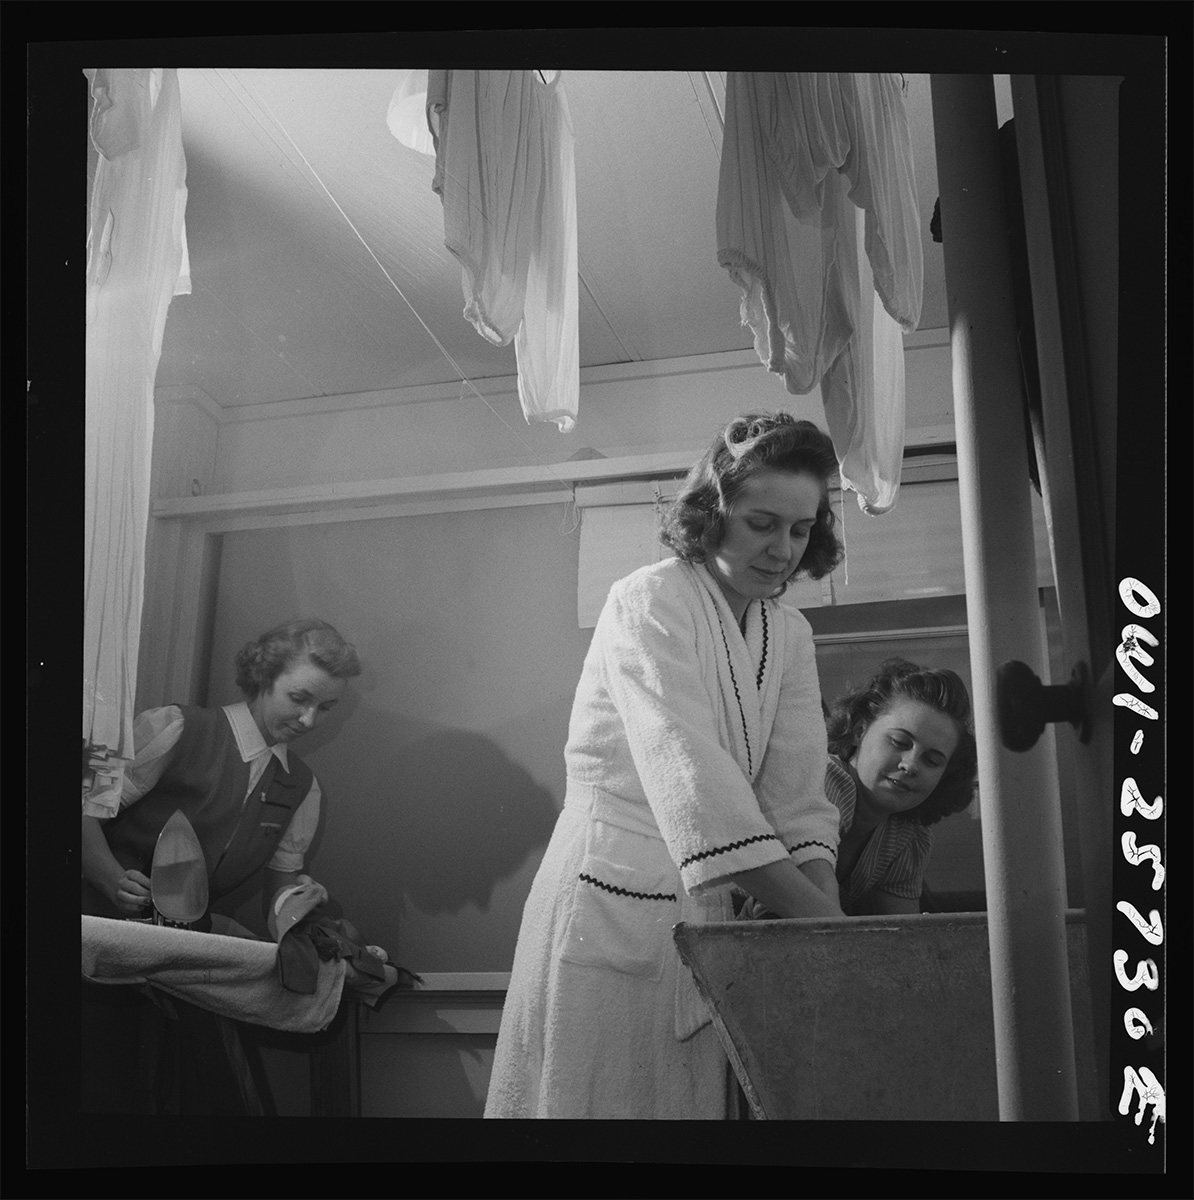 Arlington, Virginia. Washing clothes in one of the laundry rooms at Idaho Hall, Arlington Farms, a residence for women who work in the government for <p>© Esther Bubley</p>